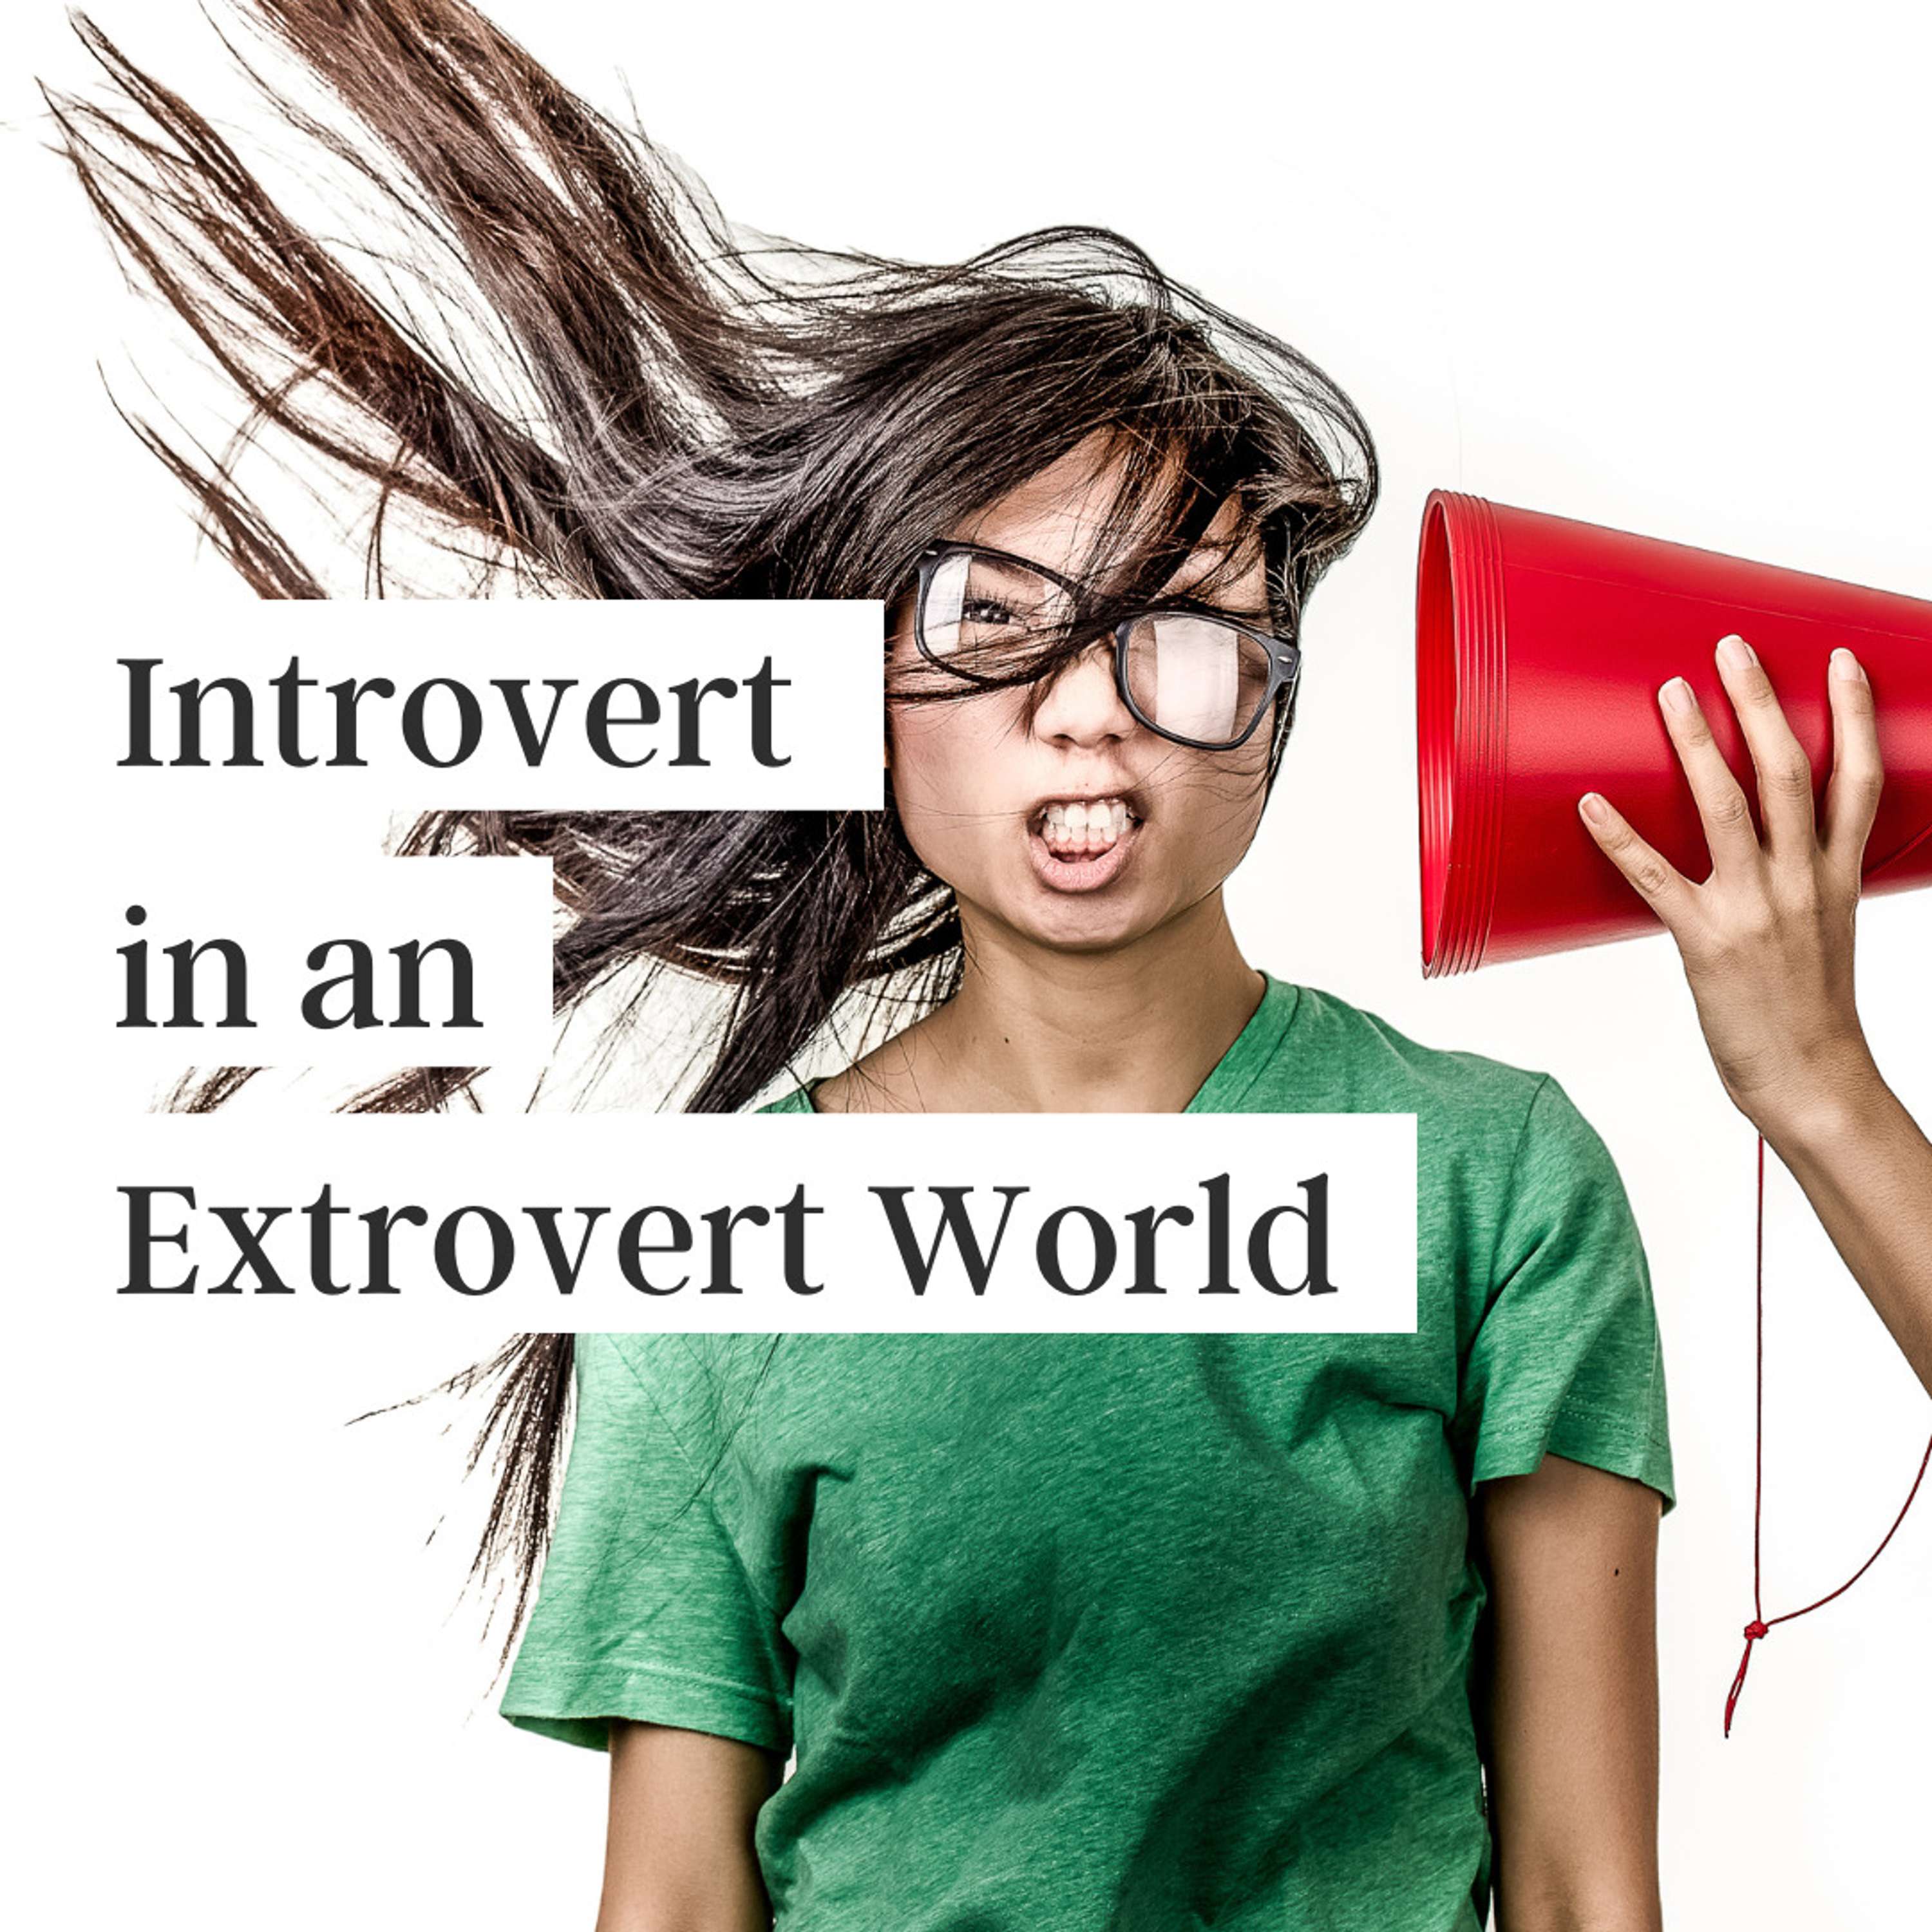 Being Introverted in an Extroverted World